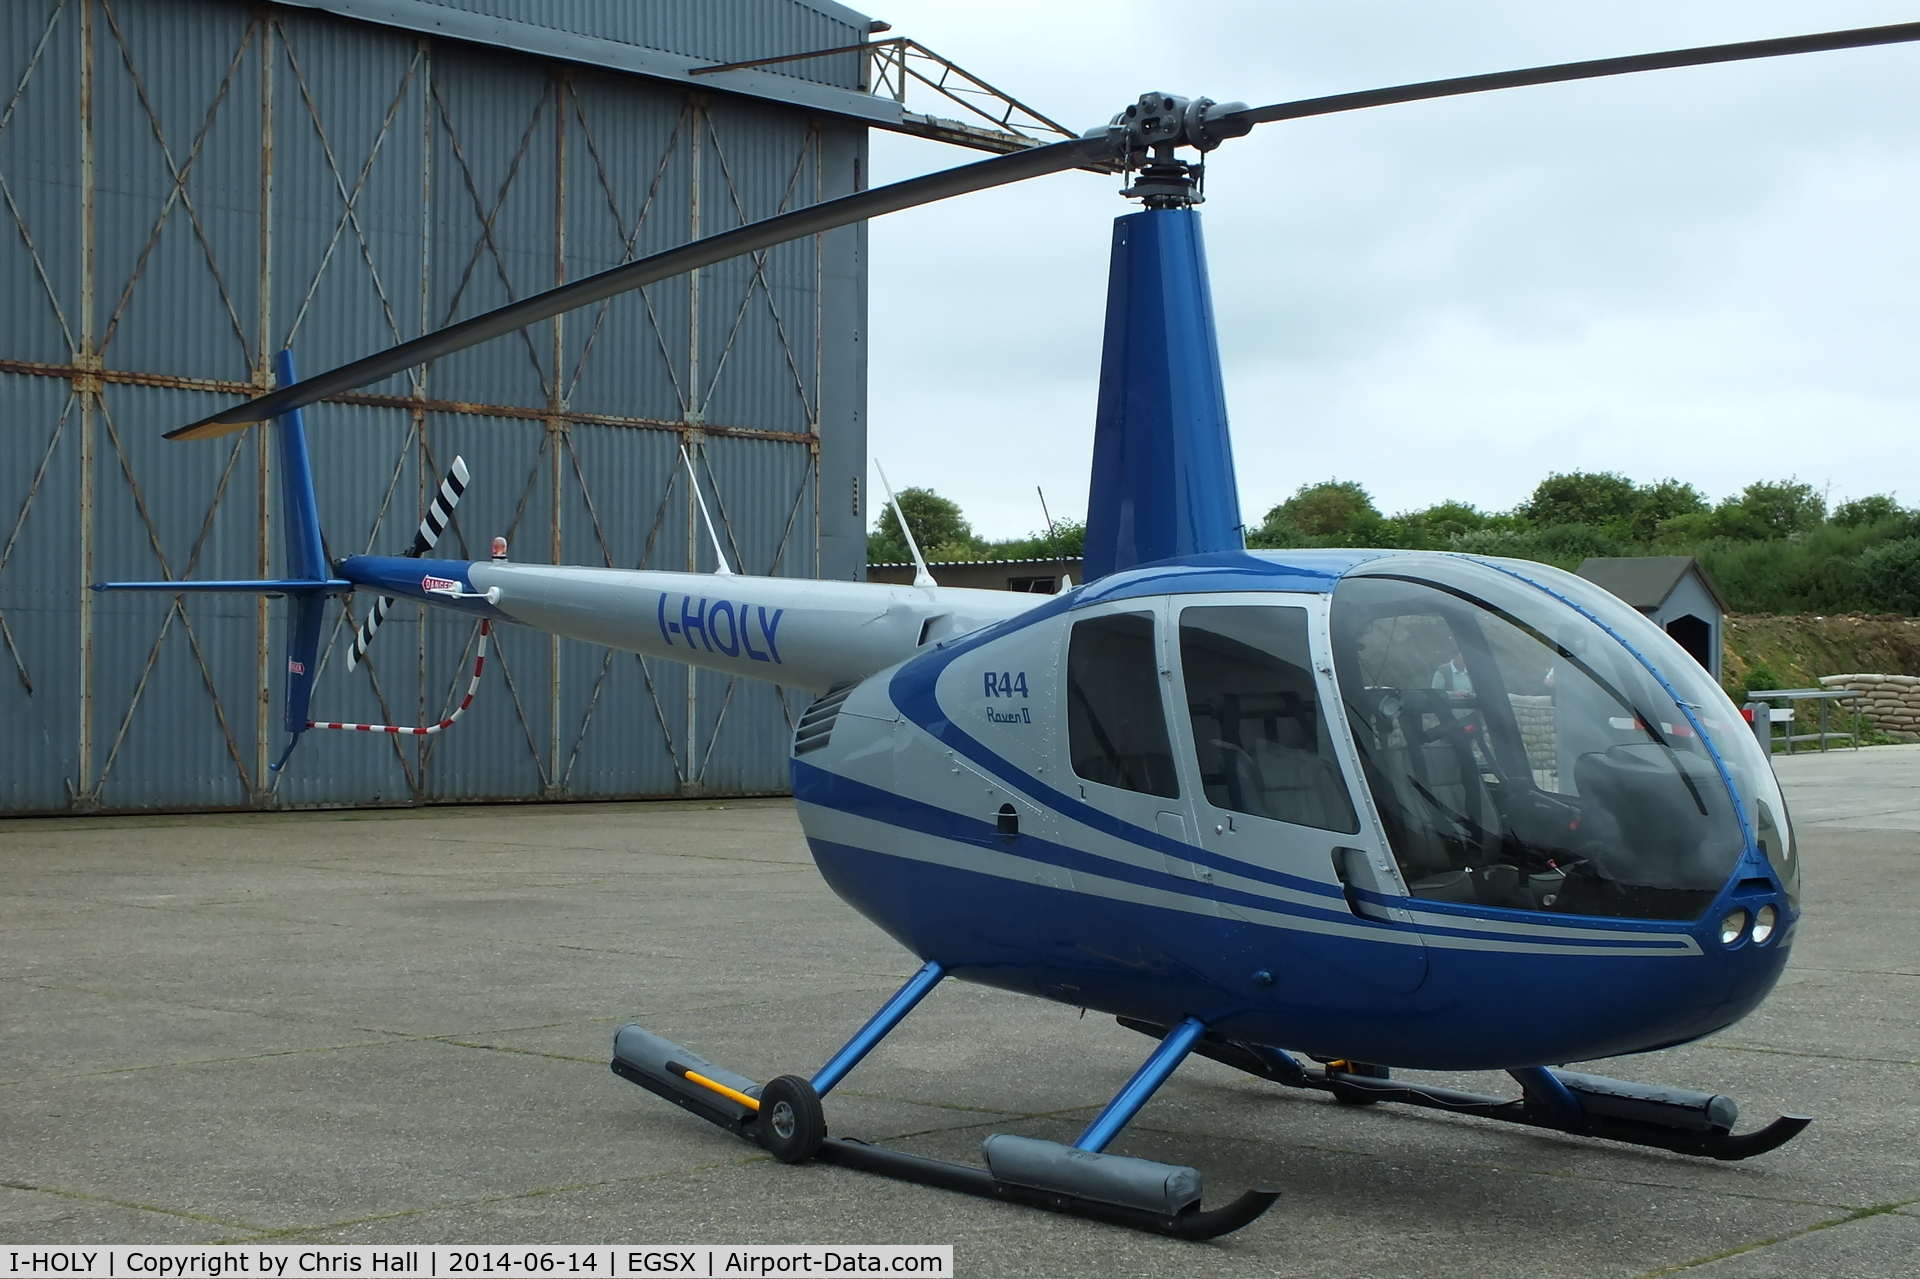 I-HOLY, 2009 Robinson R44  Raven II C/N 12580, at the Air Britain fly in